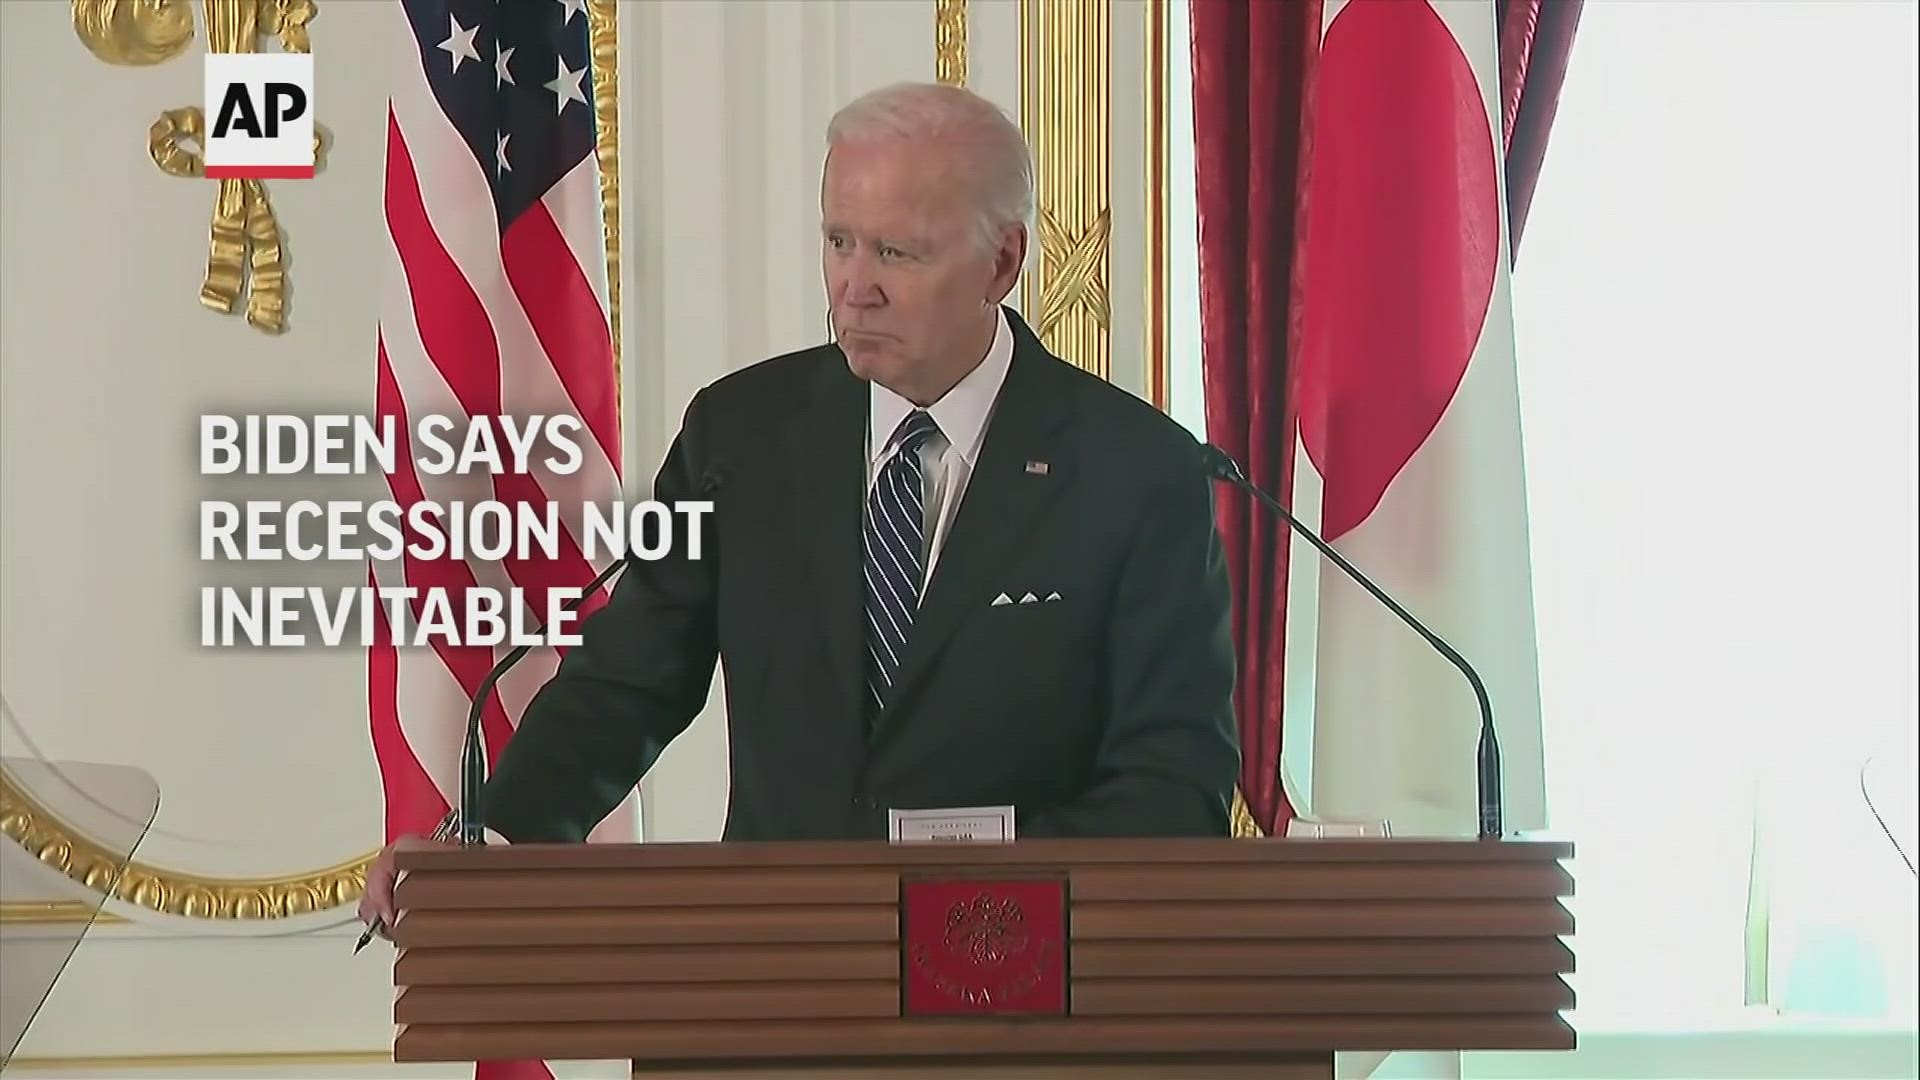 Biden acknowledged the U.S. economy has "problems" but said they were "less consequential than the rest of the world has."